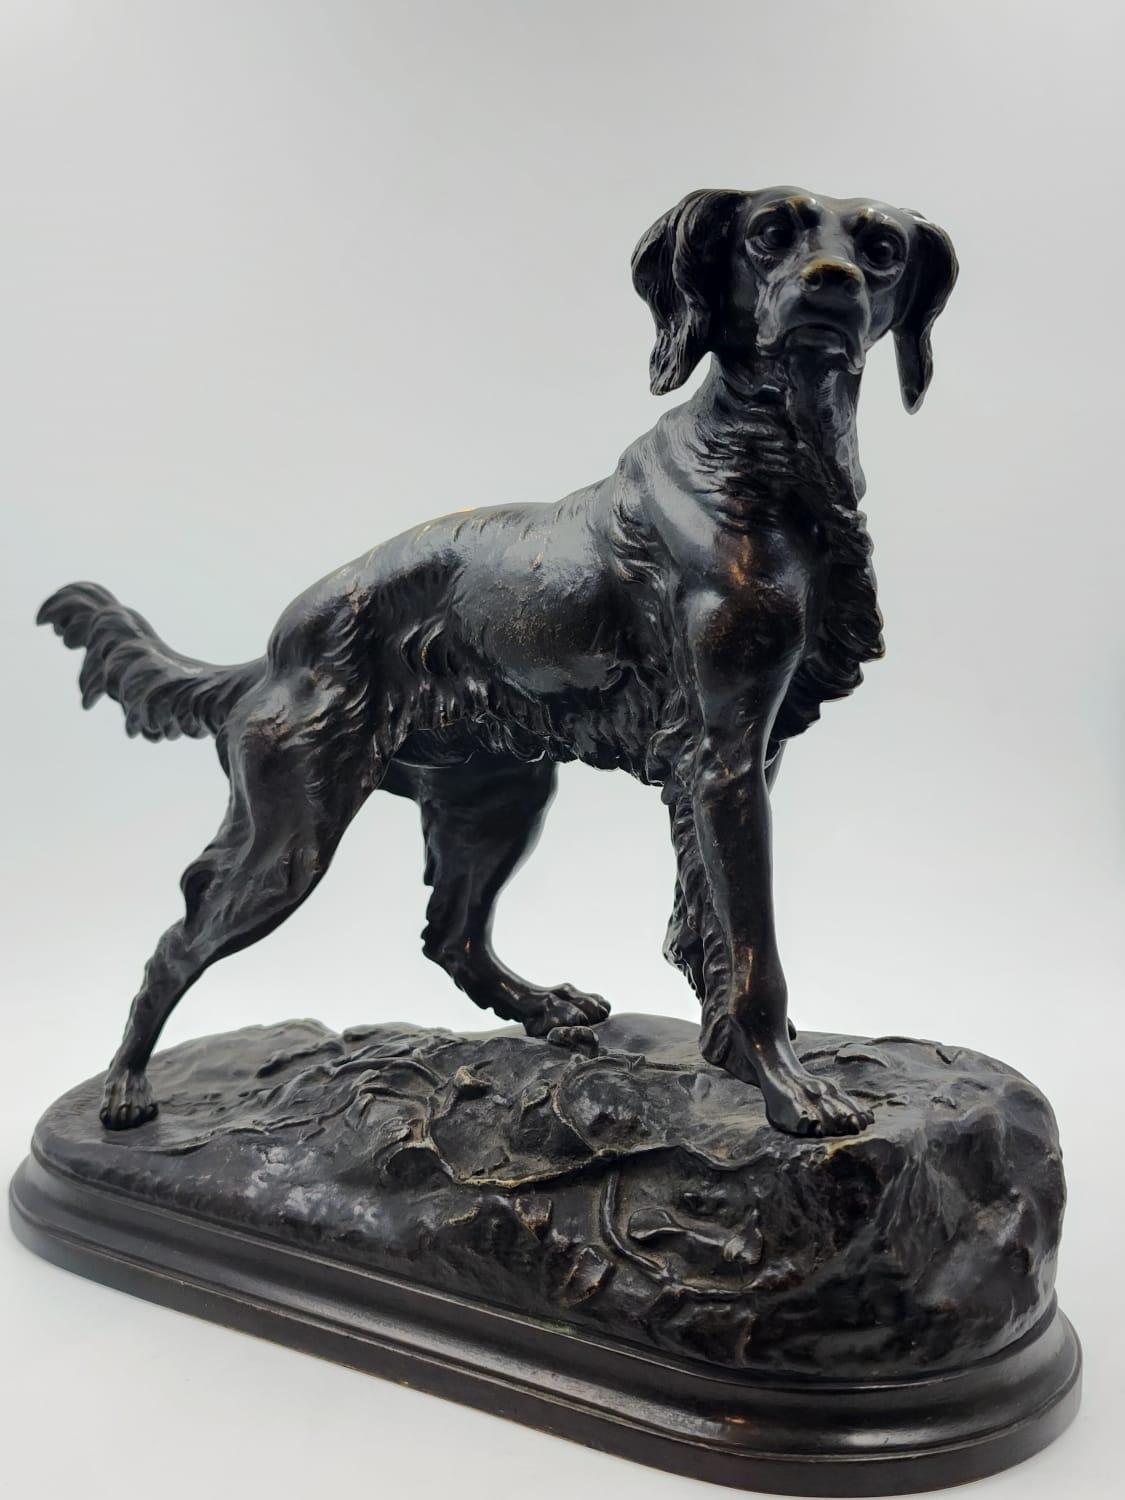 Spanish Cocker figure in patinated bronze signed by Jules Moigniez, 19th century
French bronze by the Artist Jules Moigniez, in this beautiful piece an old Spanish Cocker is represented, when they were hunting and search dogs, the artist did so